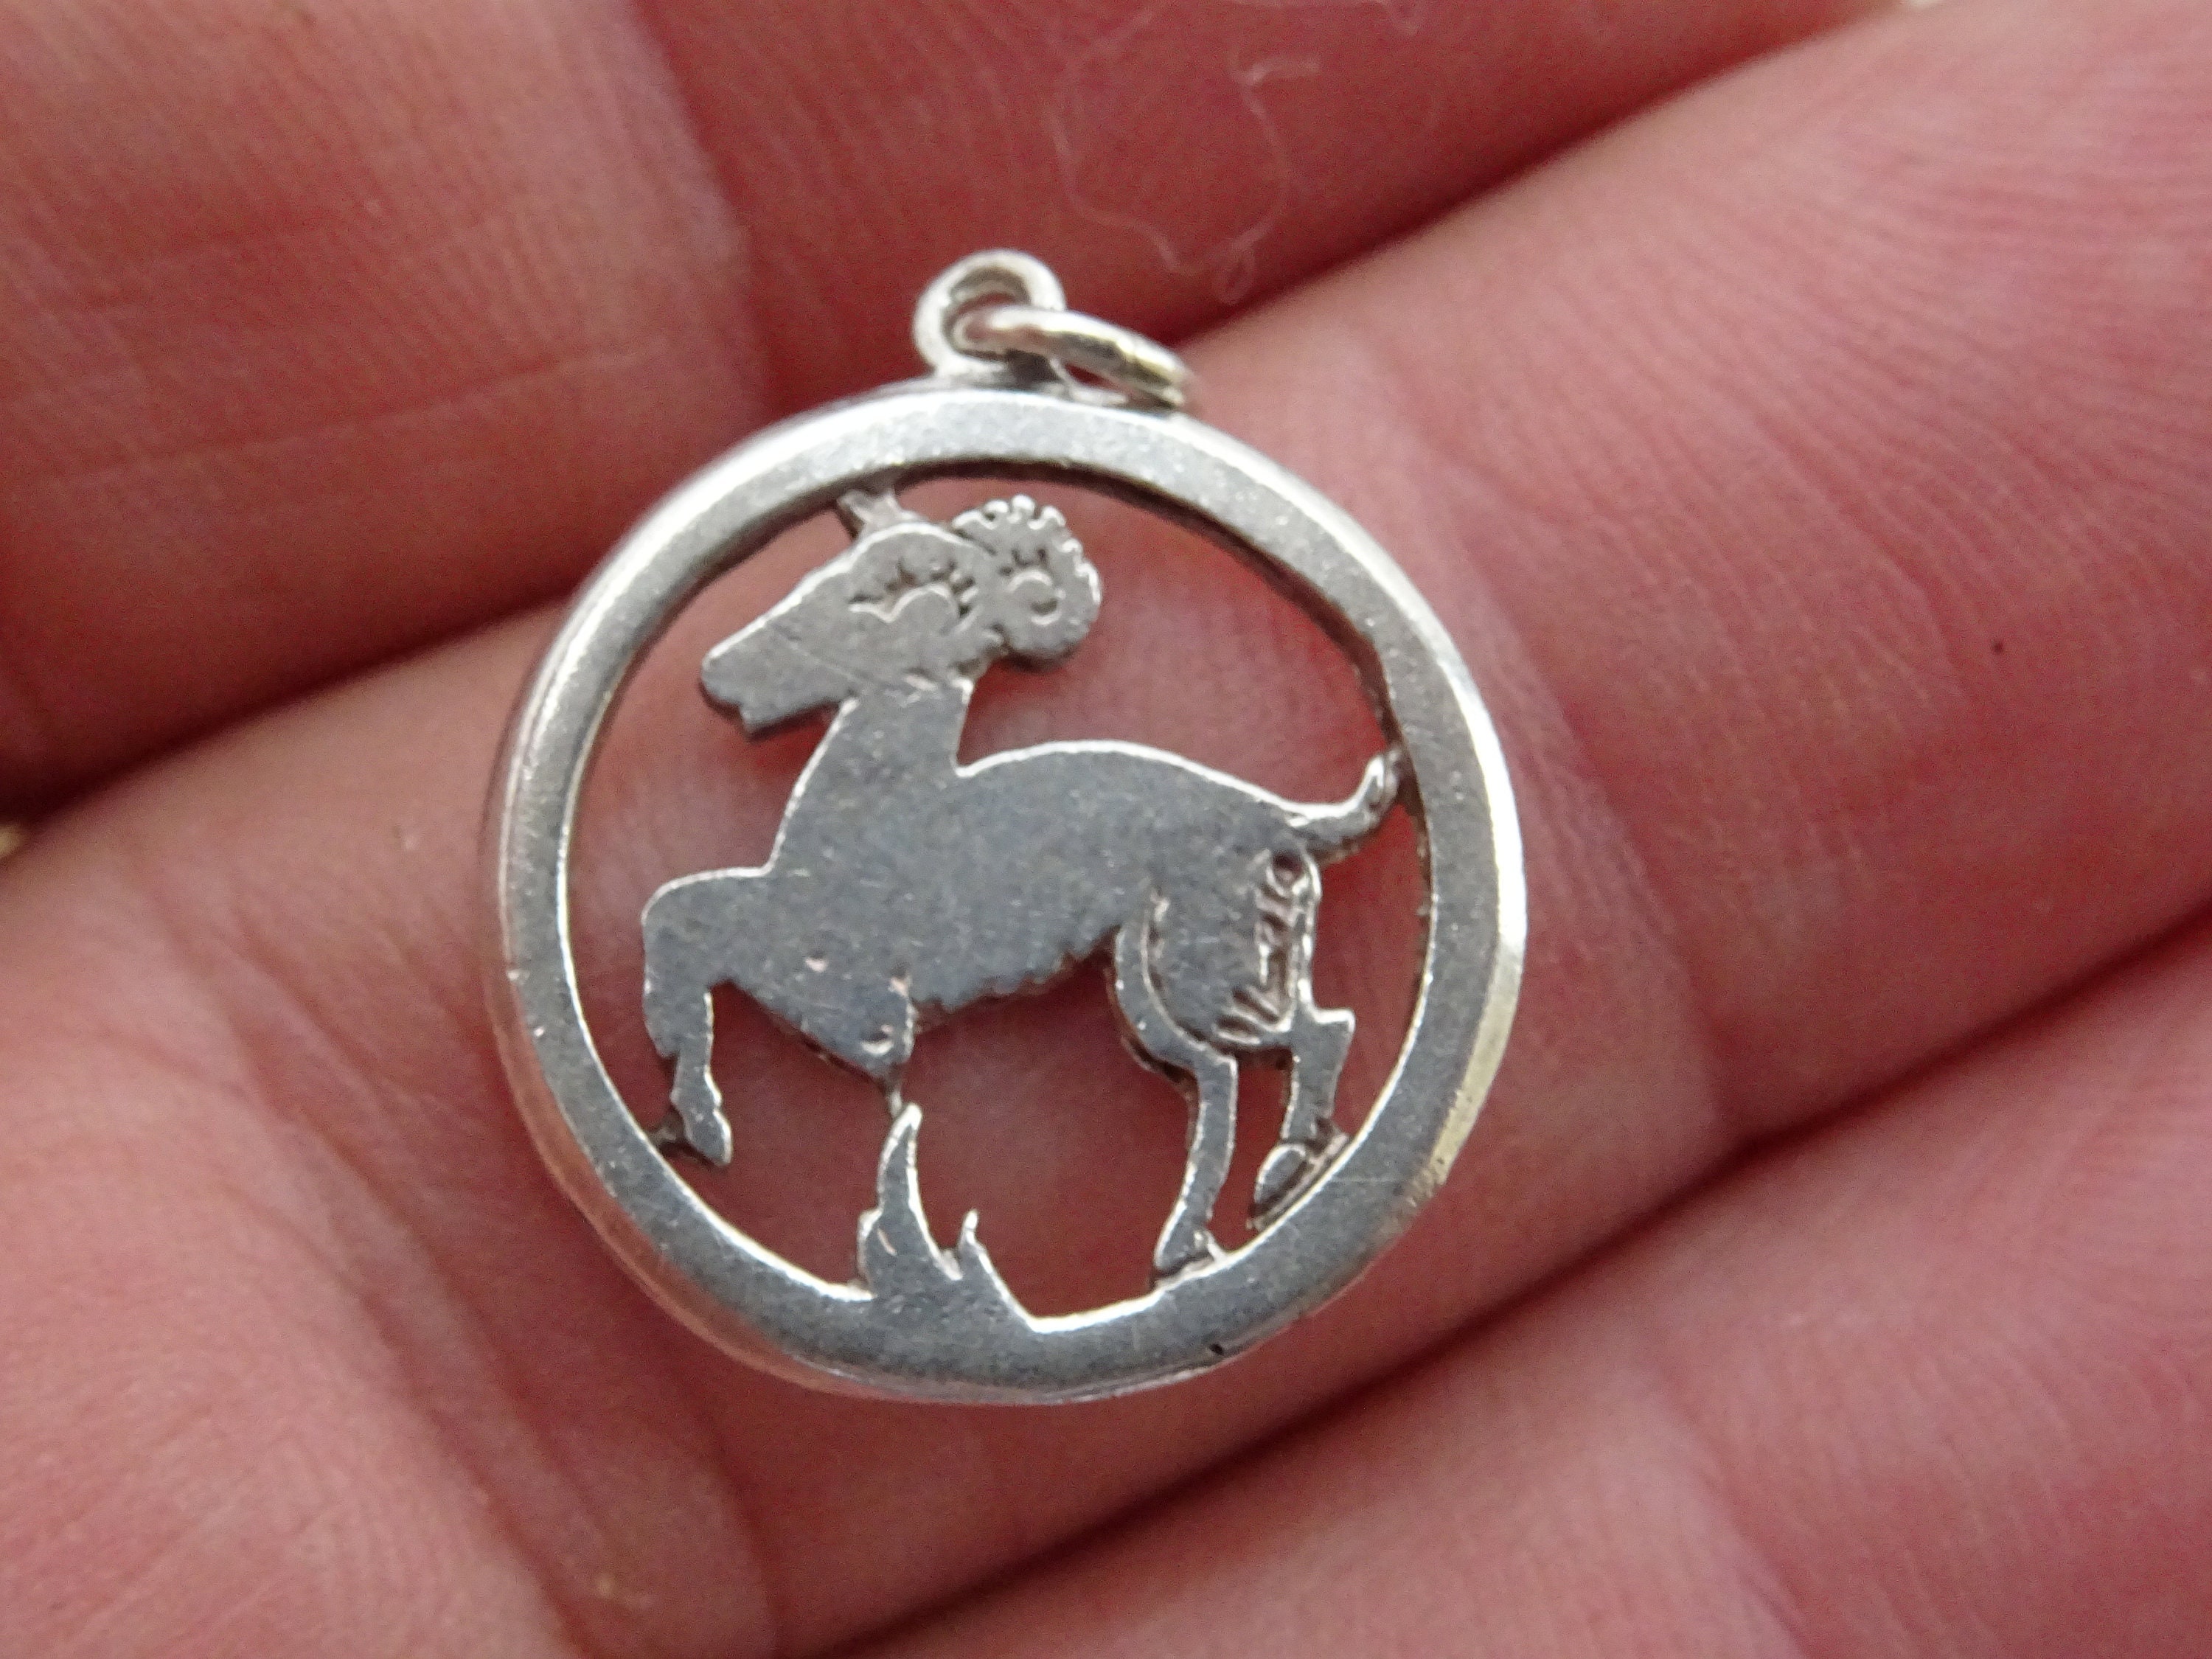 Vintage Silver | Marked Zodiac Constellation Medal Pendant Charm Medallion Sign Of Aries. Ram 2 B